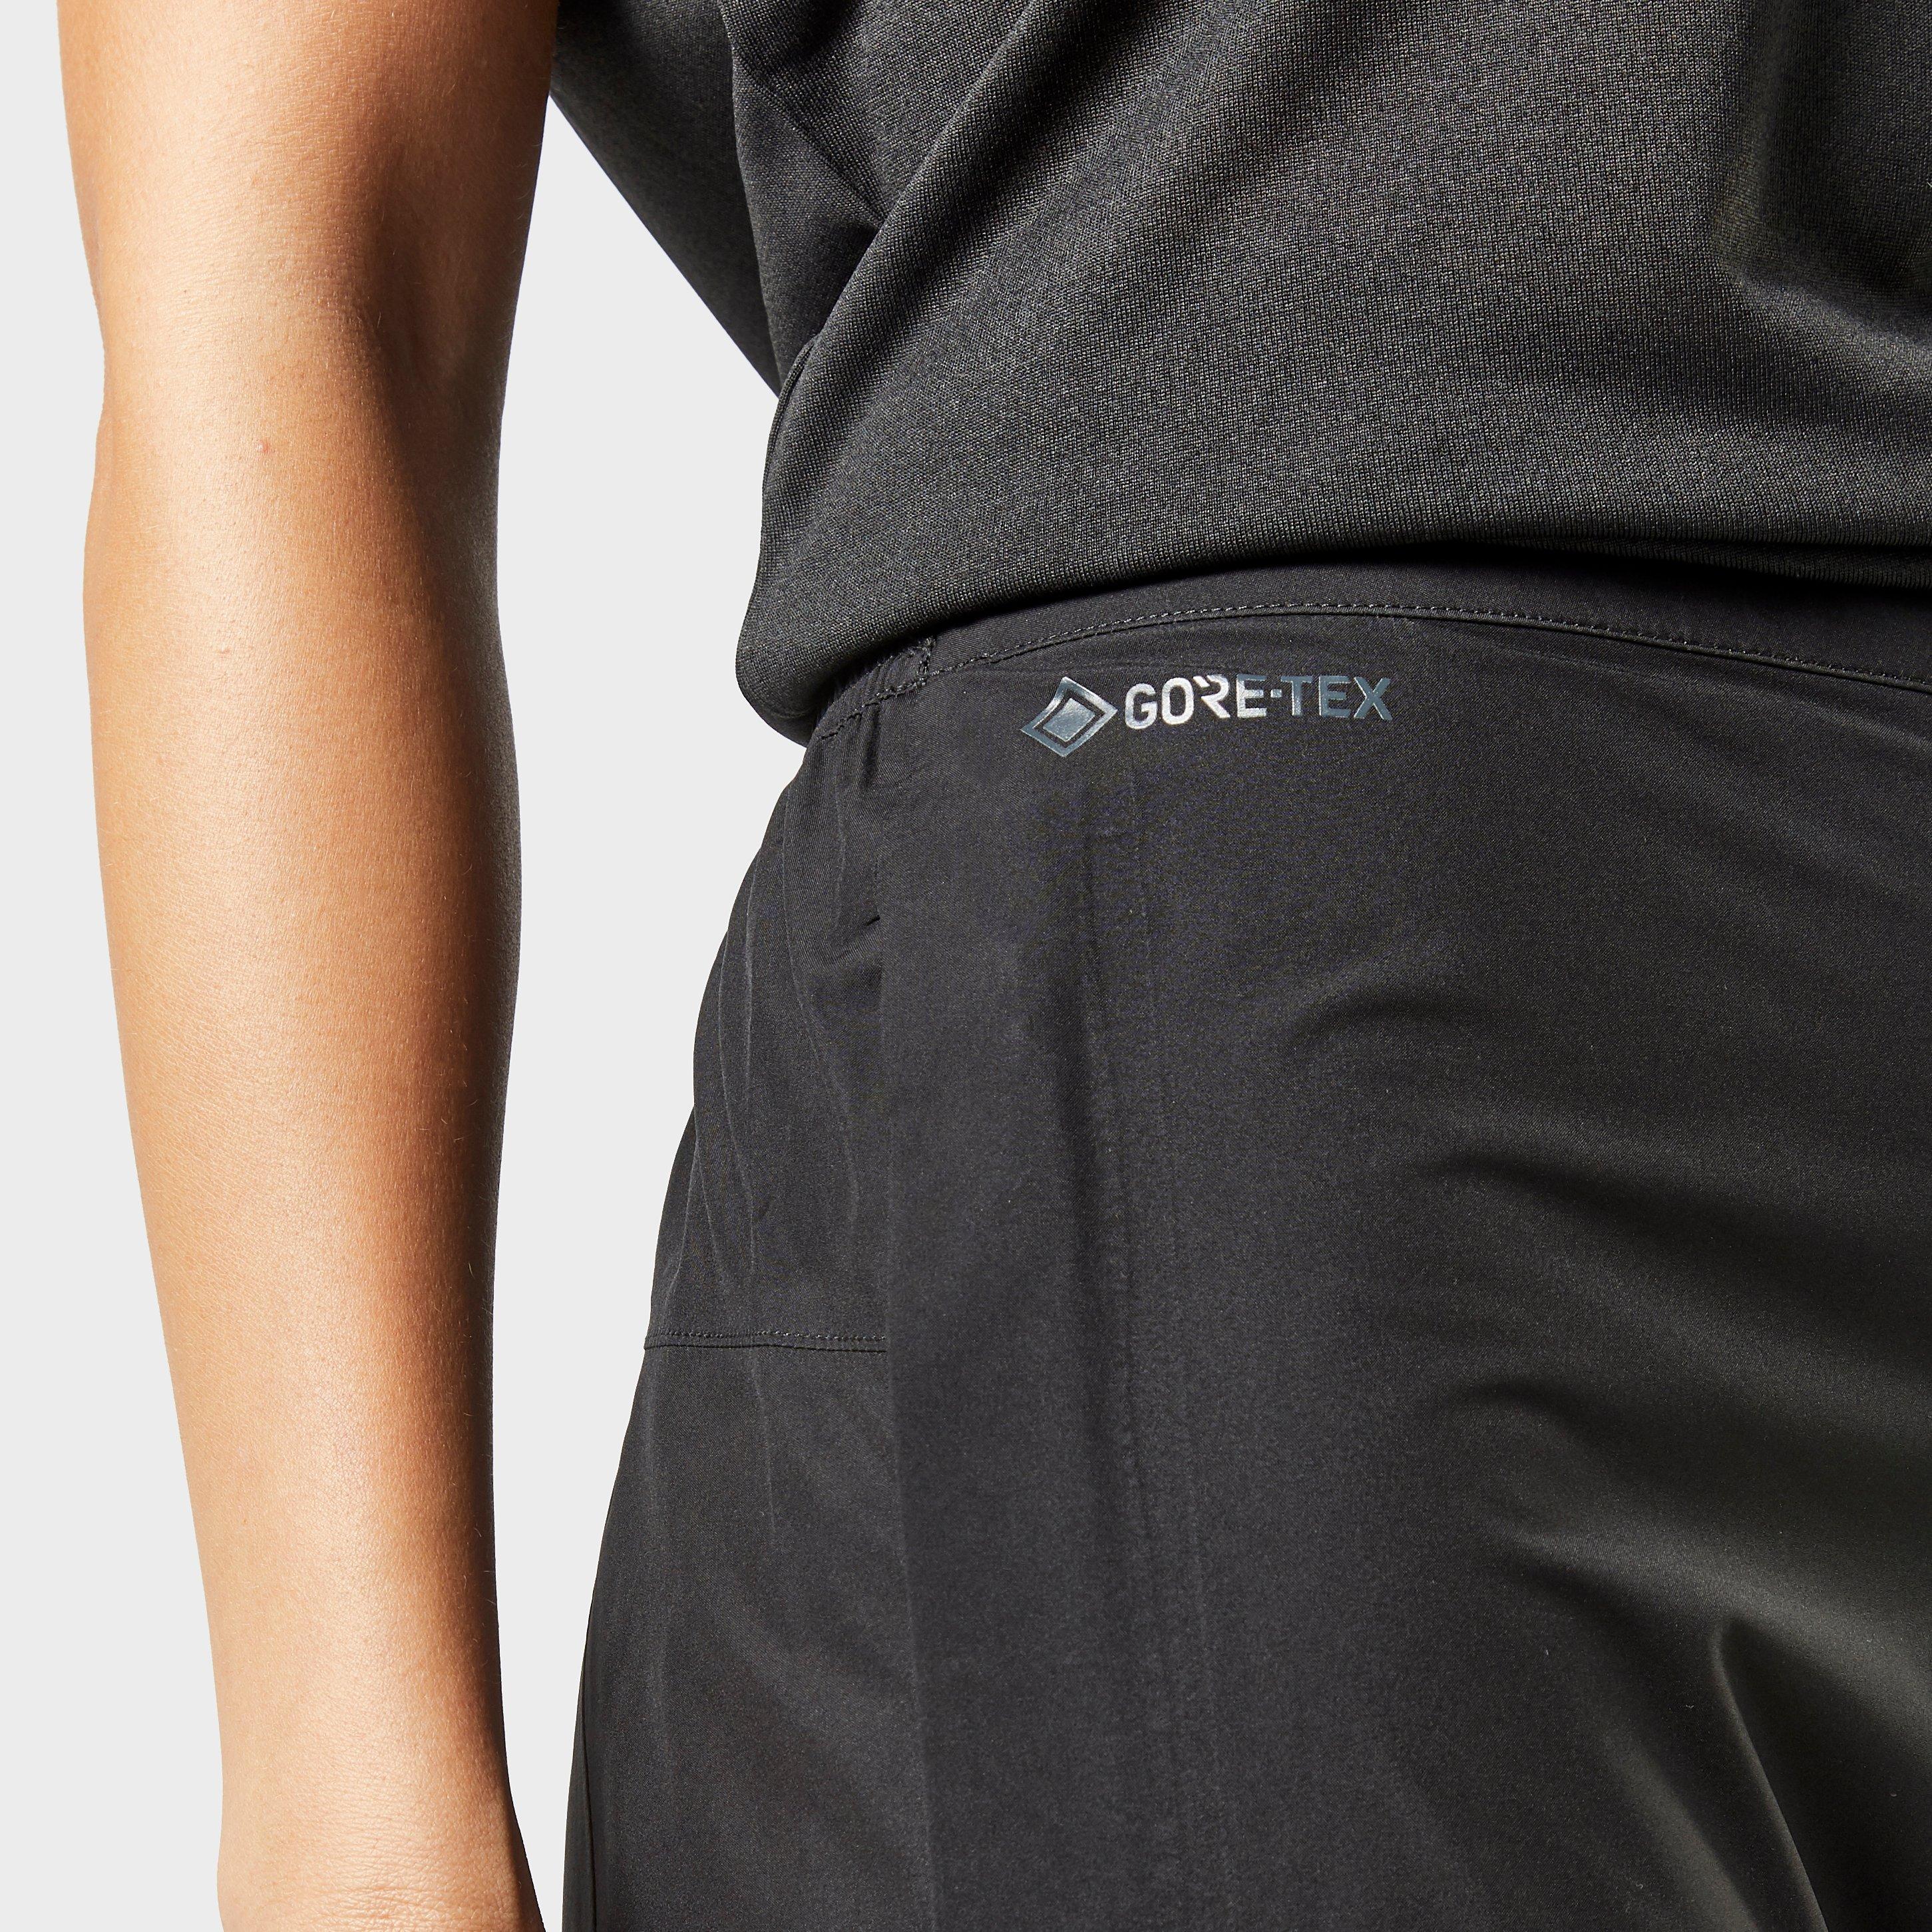 the north face dryzzle full zip pant